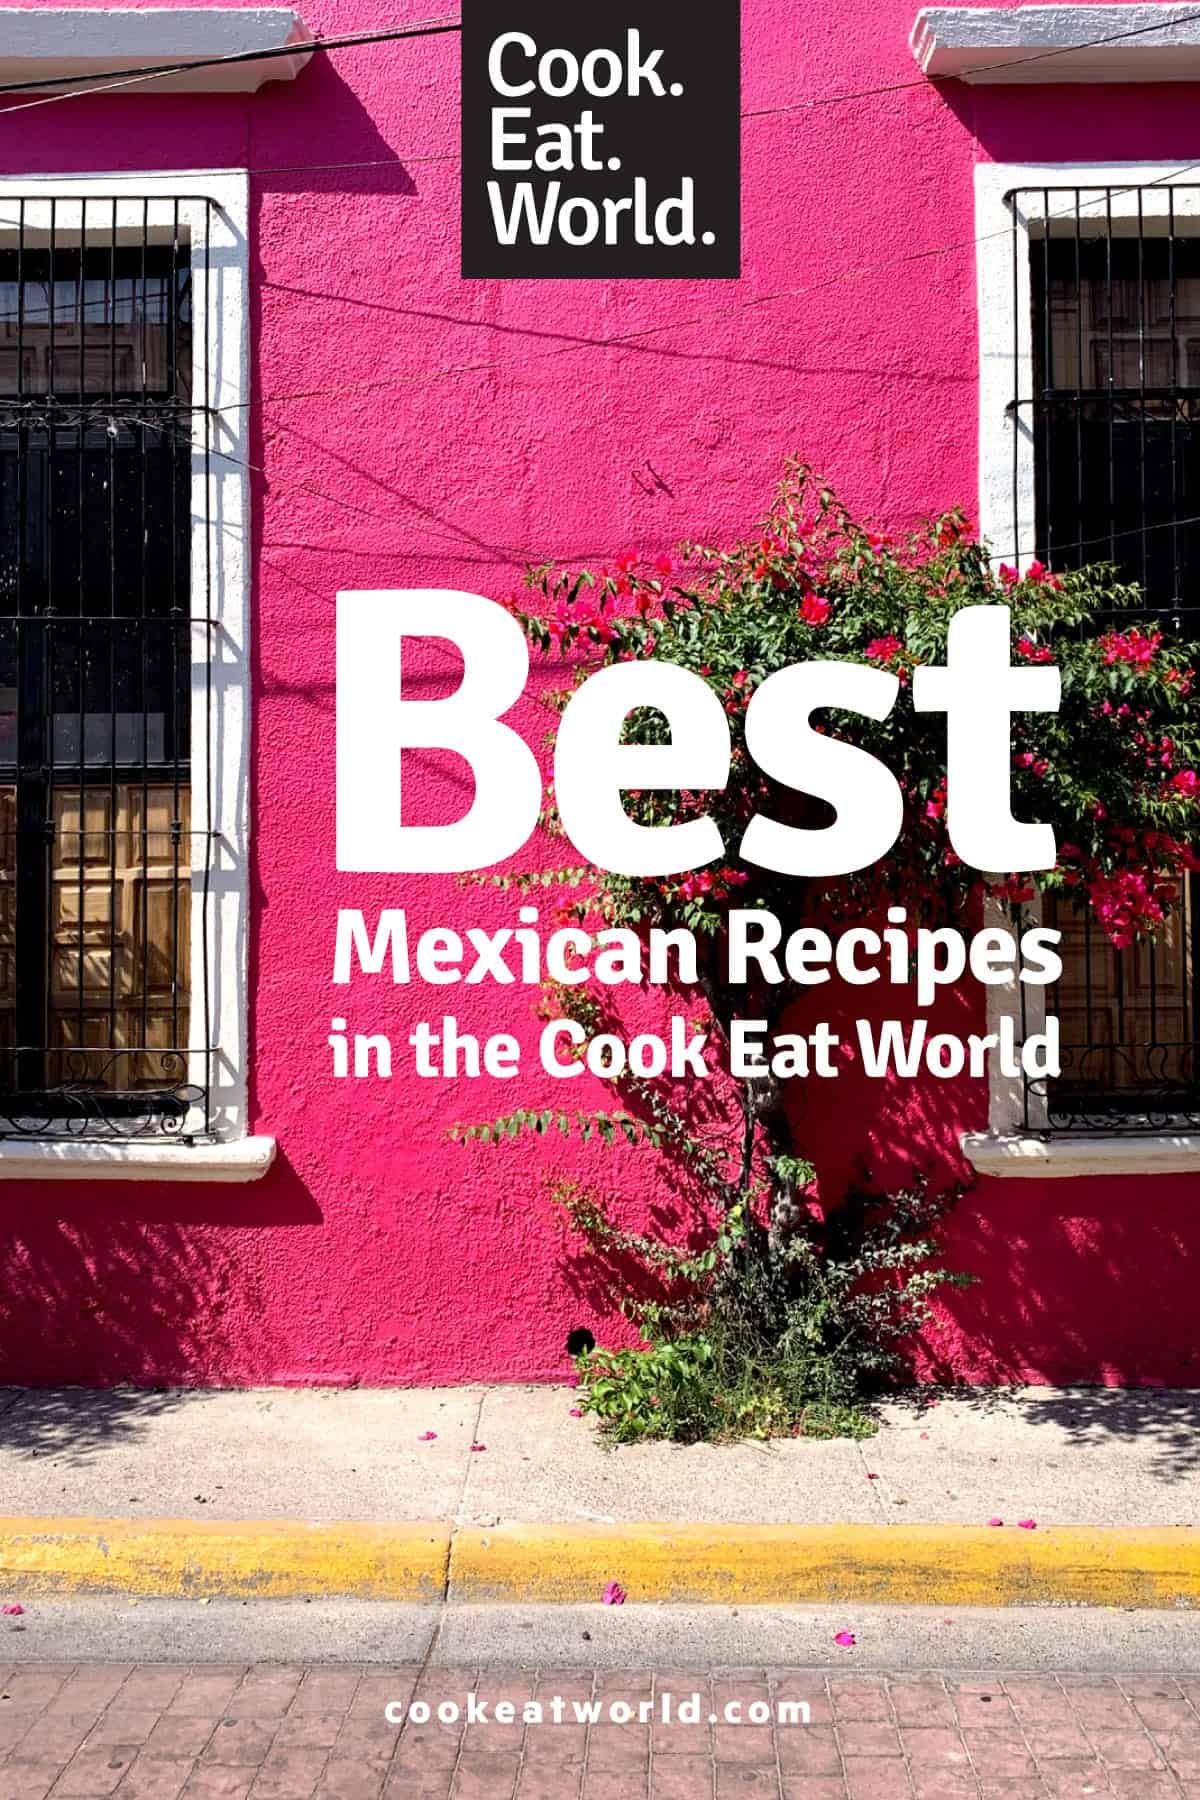 Favourite Mexican recipes from cookeatworld.com